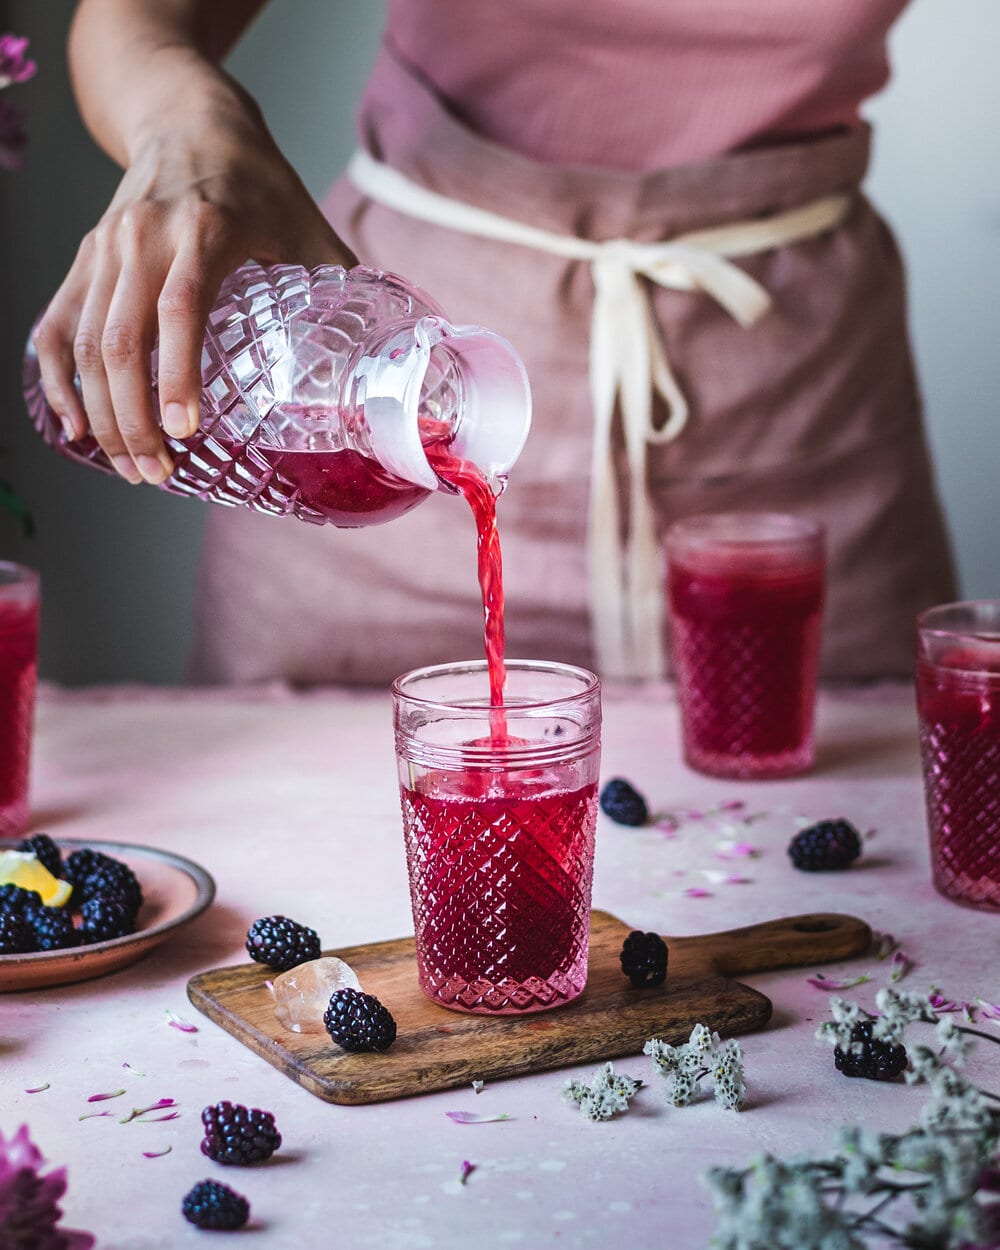 woman pouring blackberry lemonade into cup.